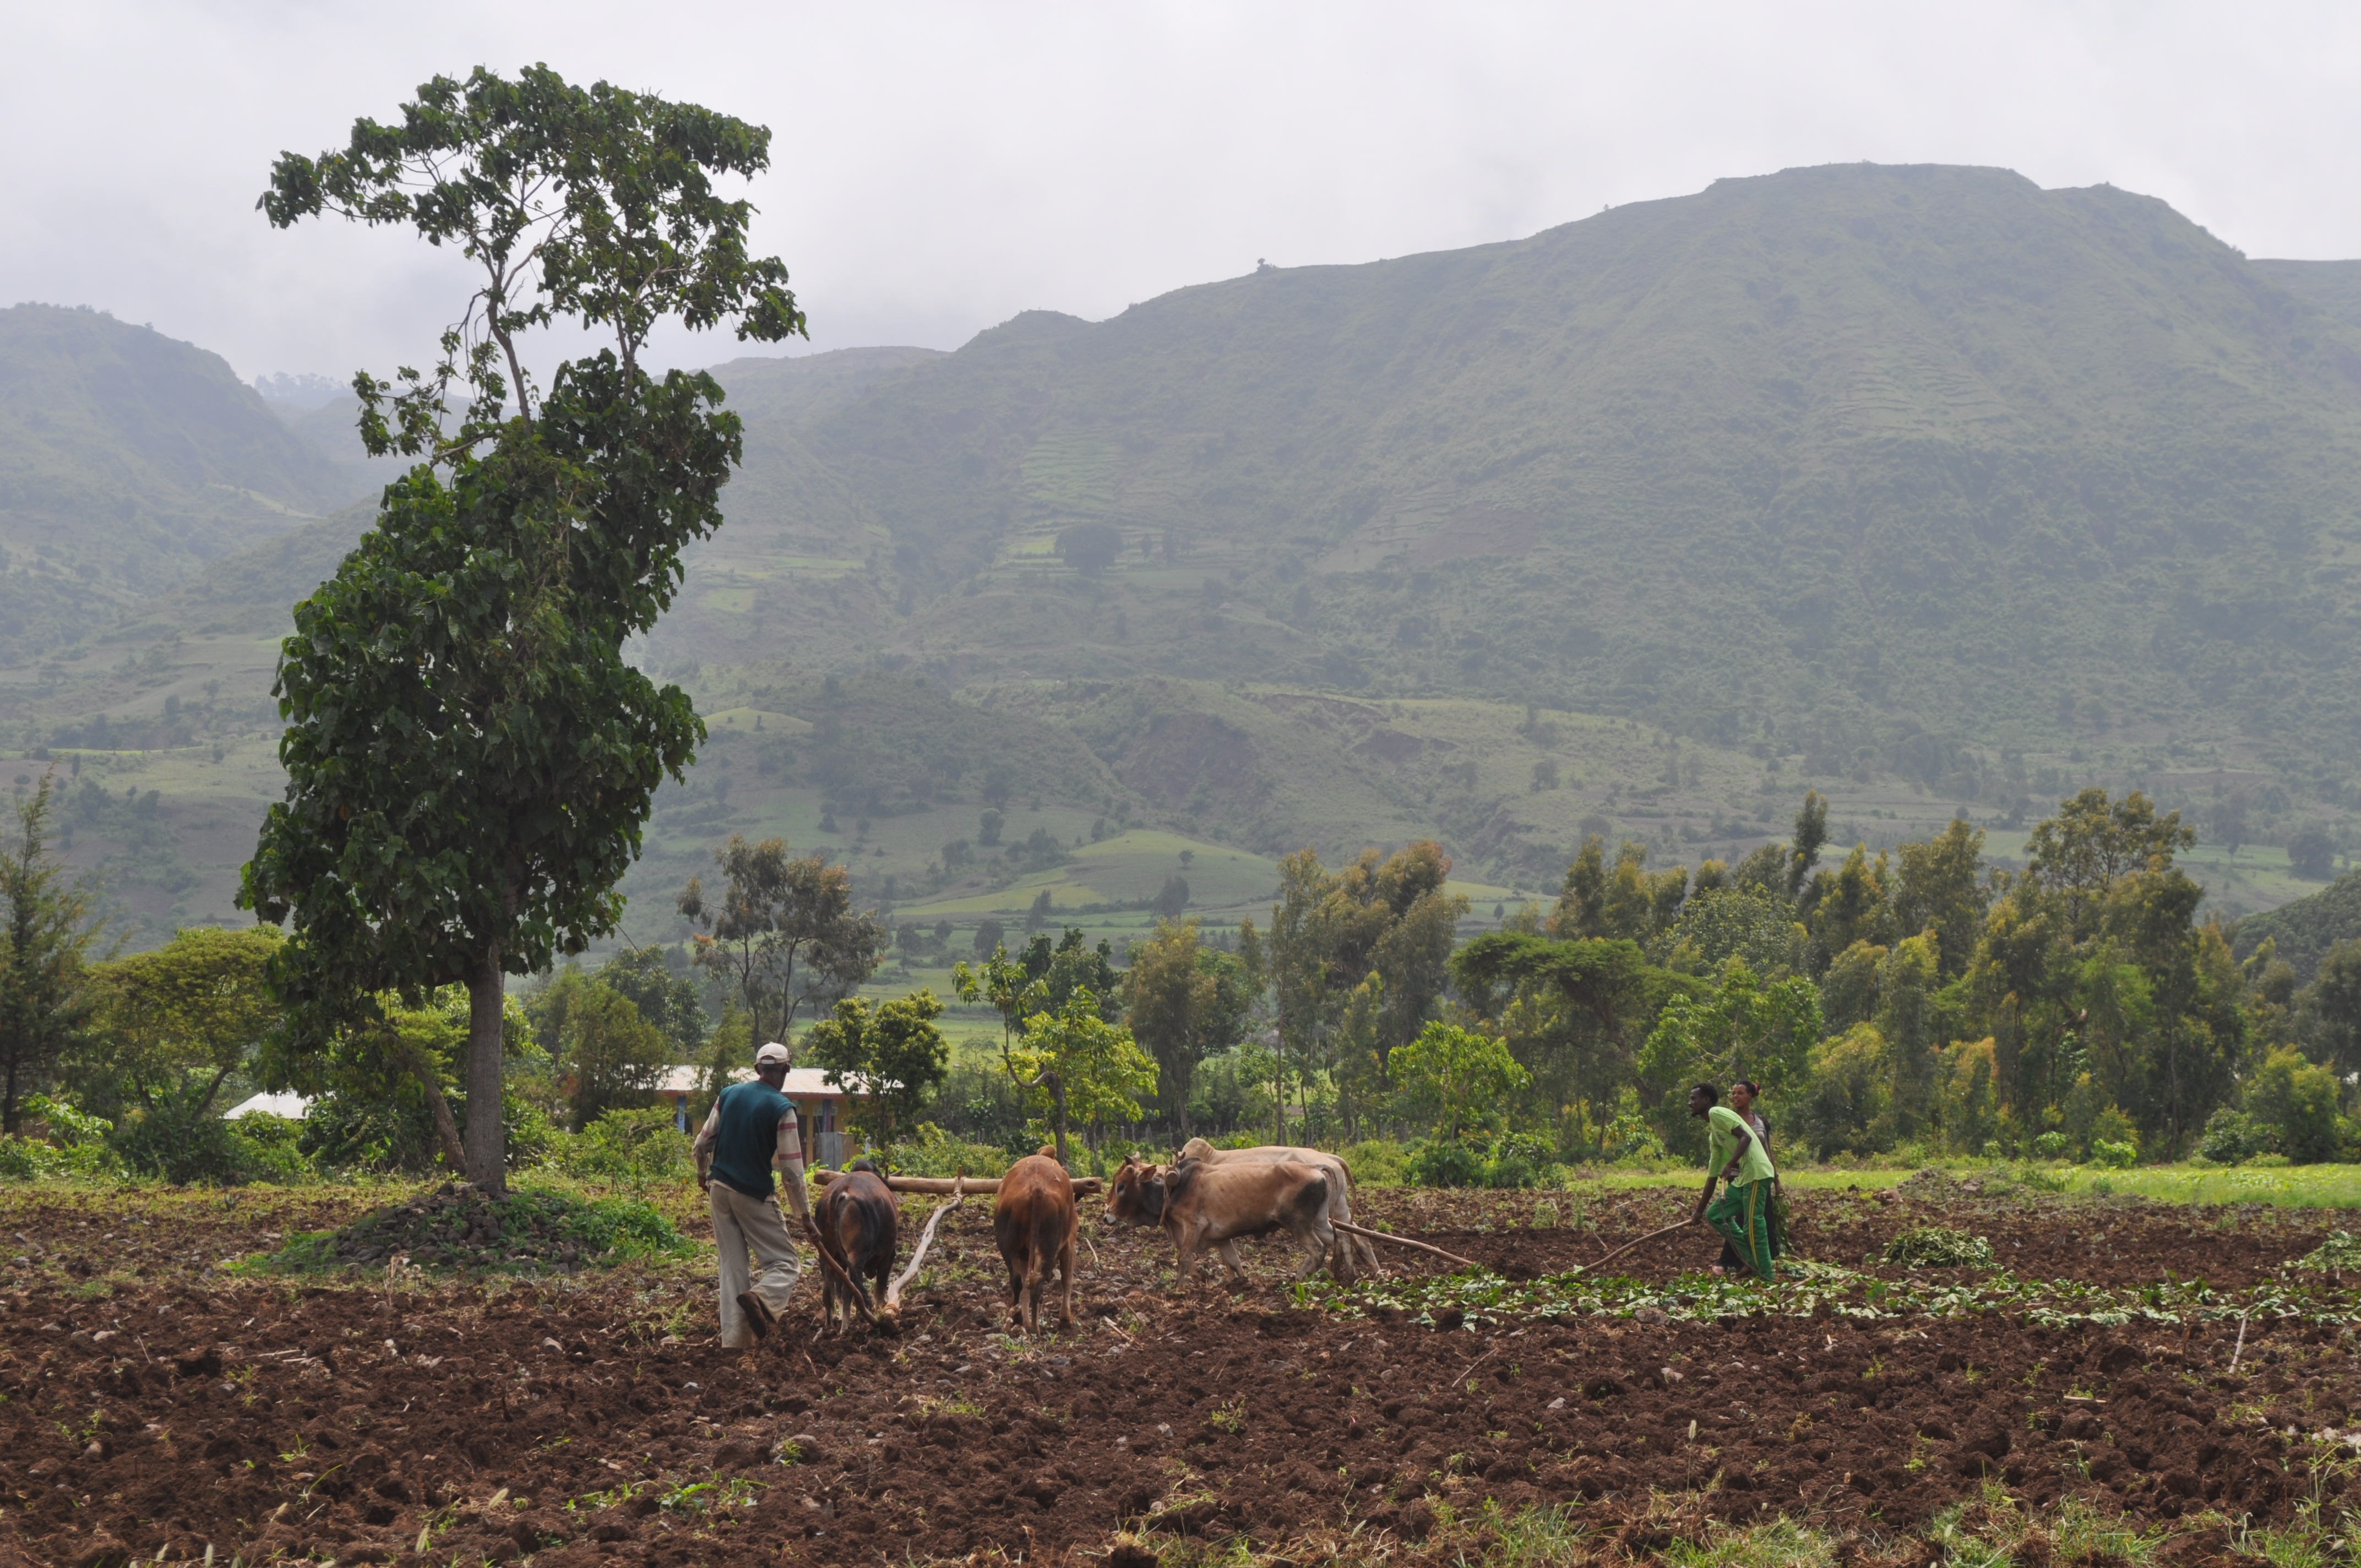 Image: Ploughing in the Gamo Highlands, Ethiopia